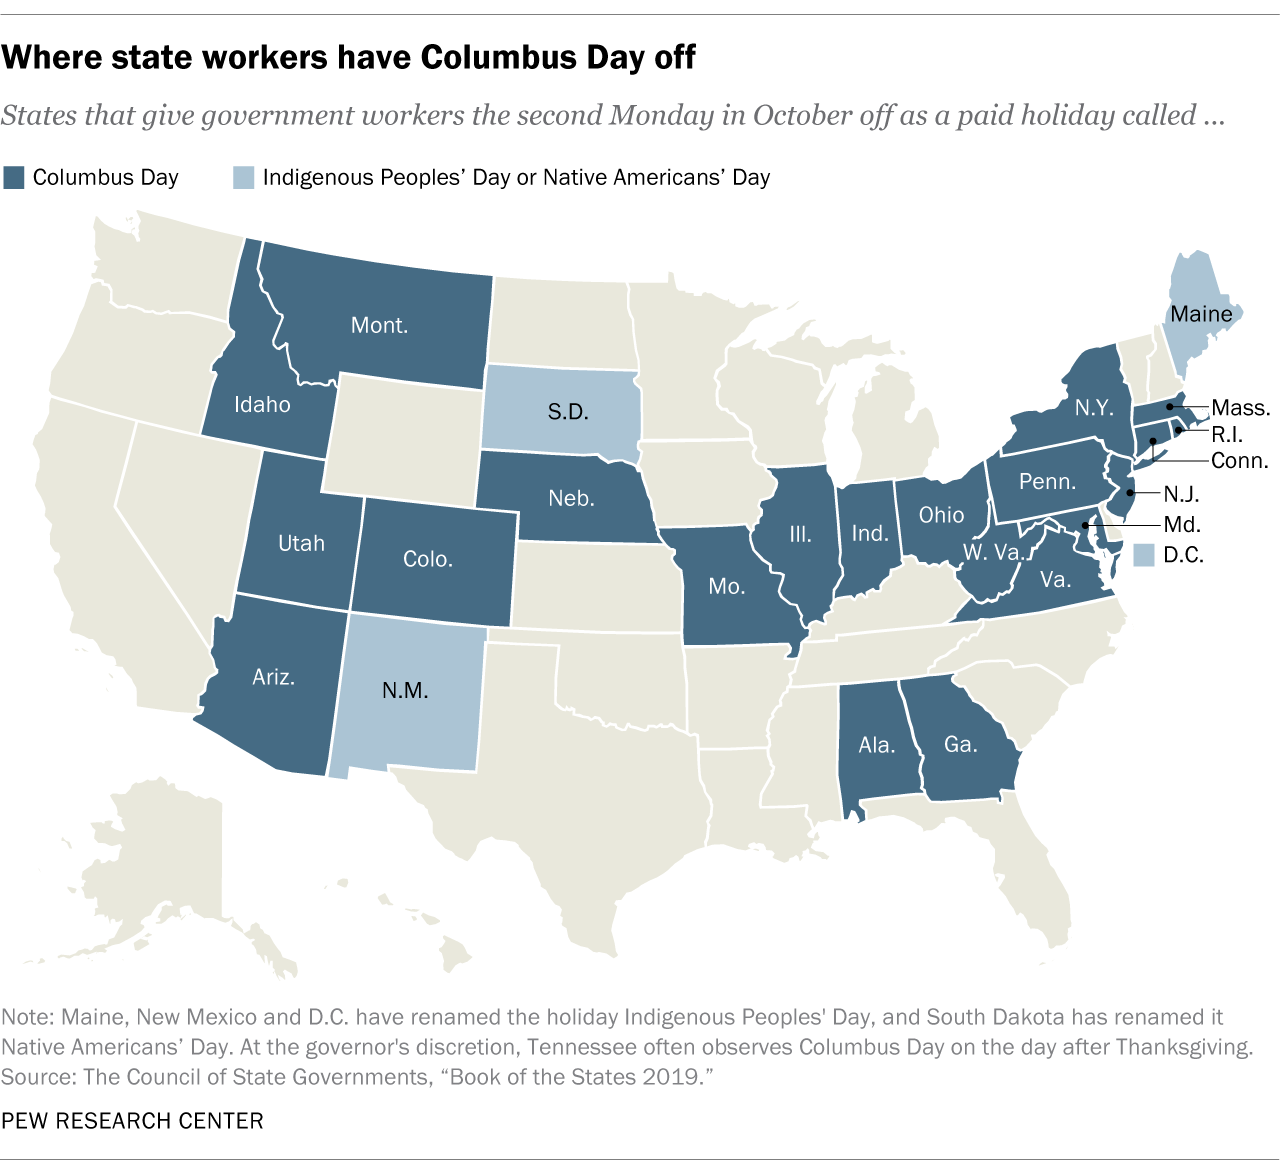 Where state workers have Columbus Day off